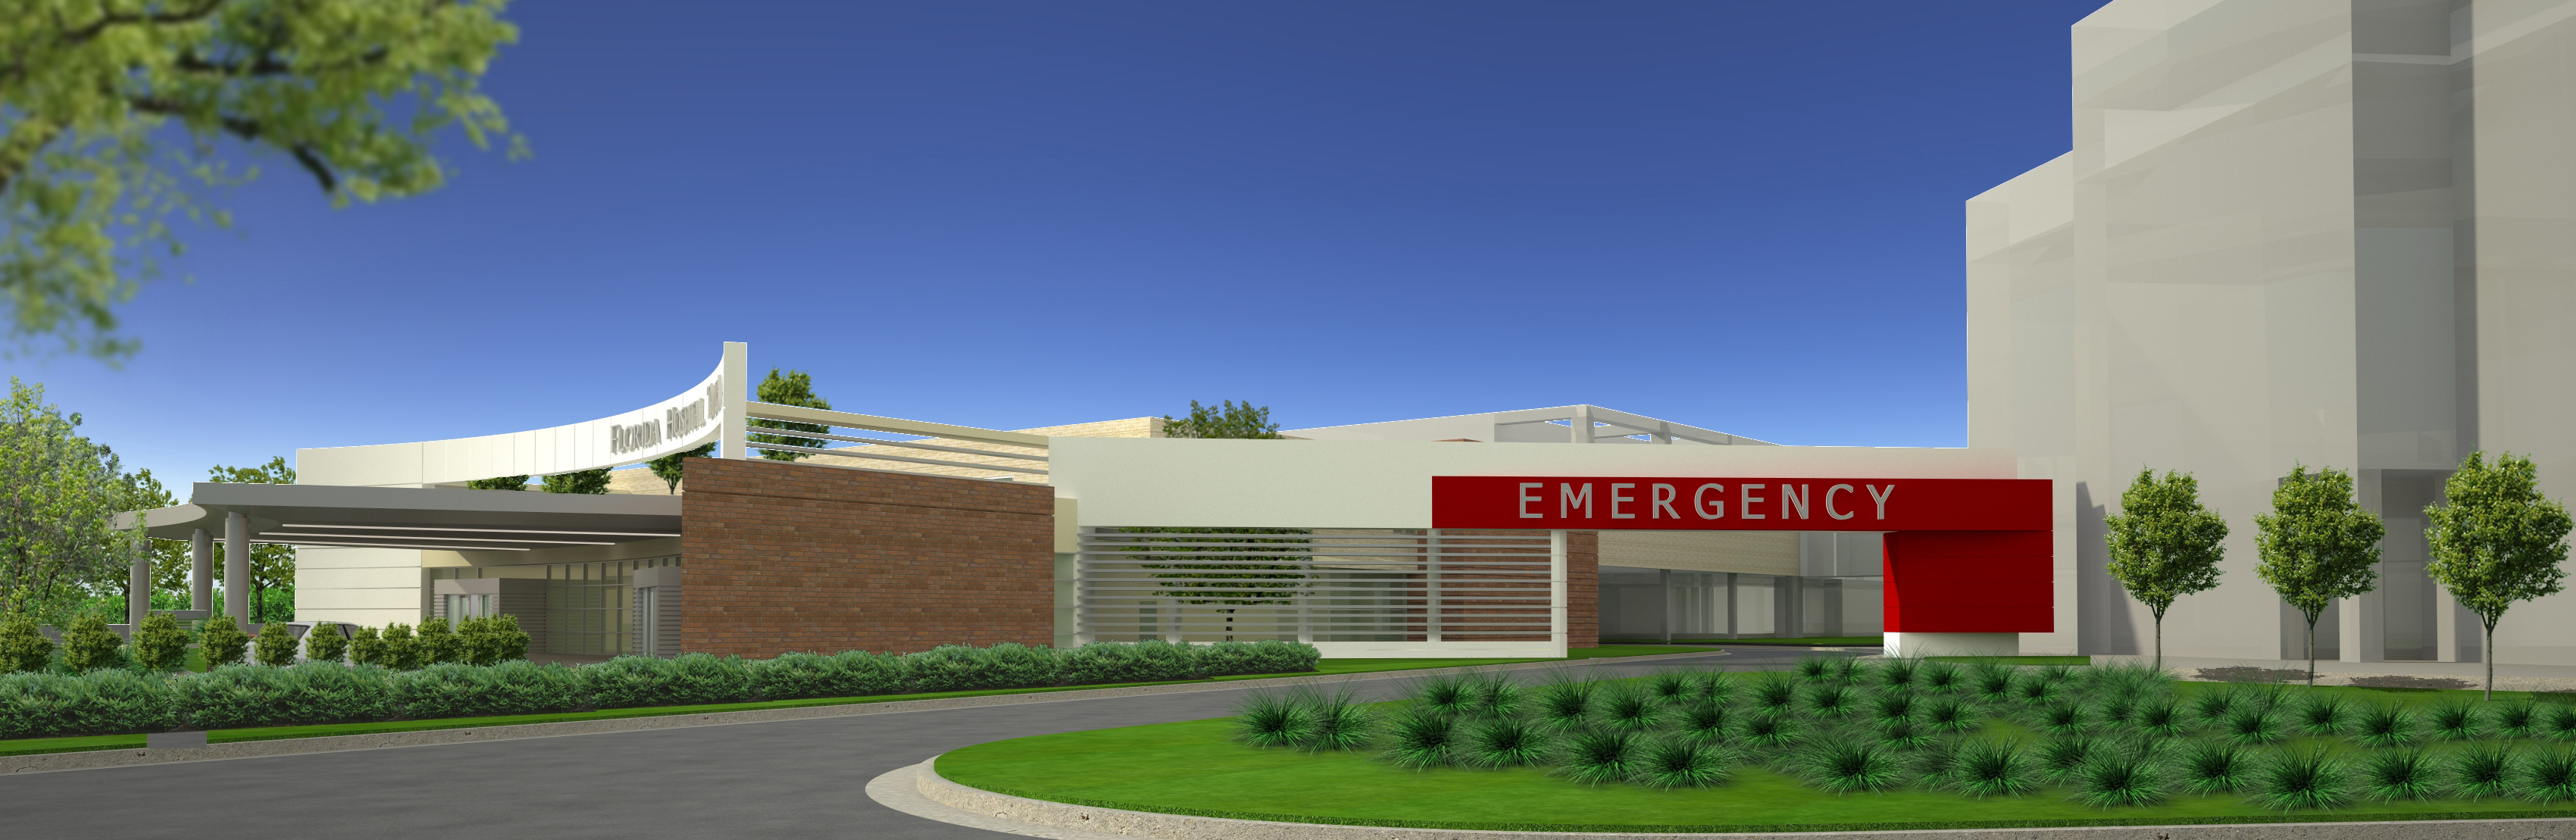 New Emergency Department at Florida Hospital Tampa